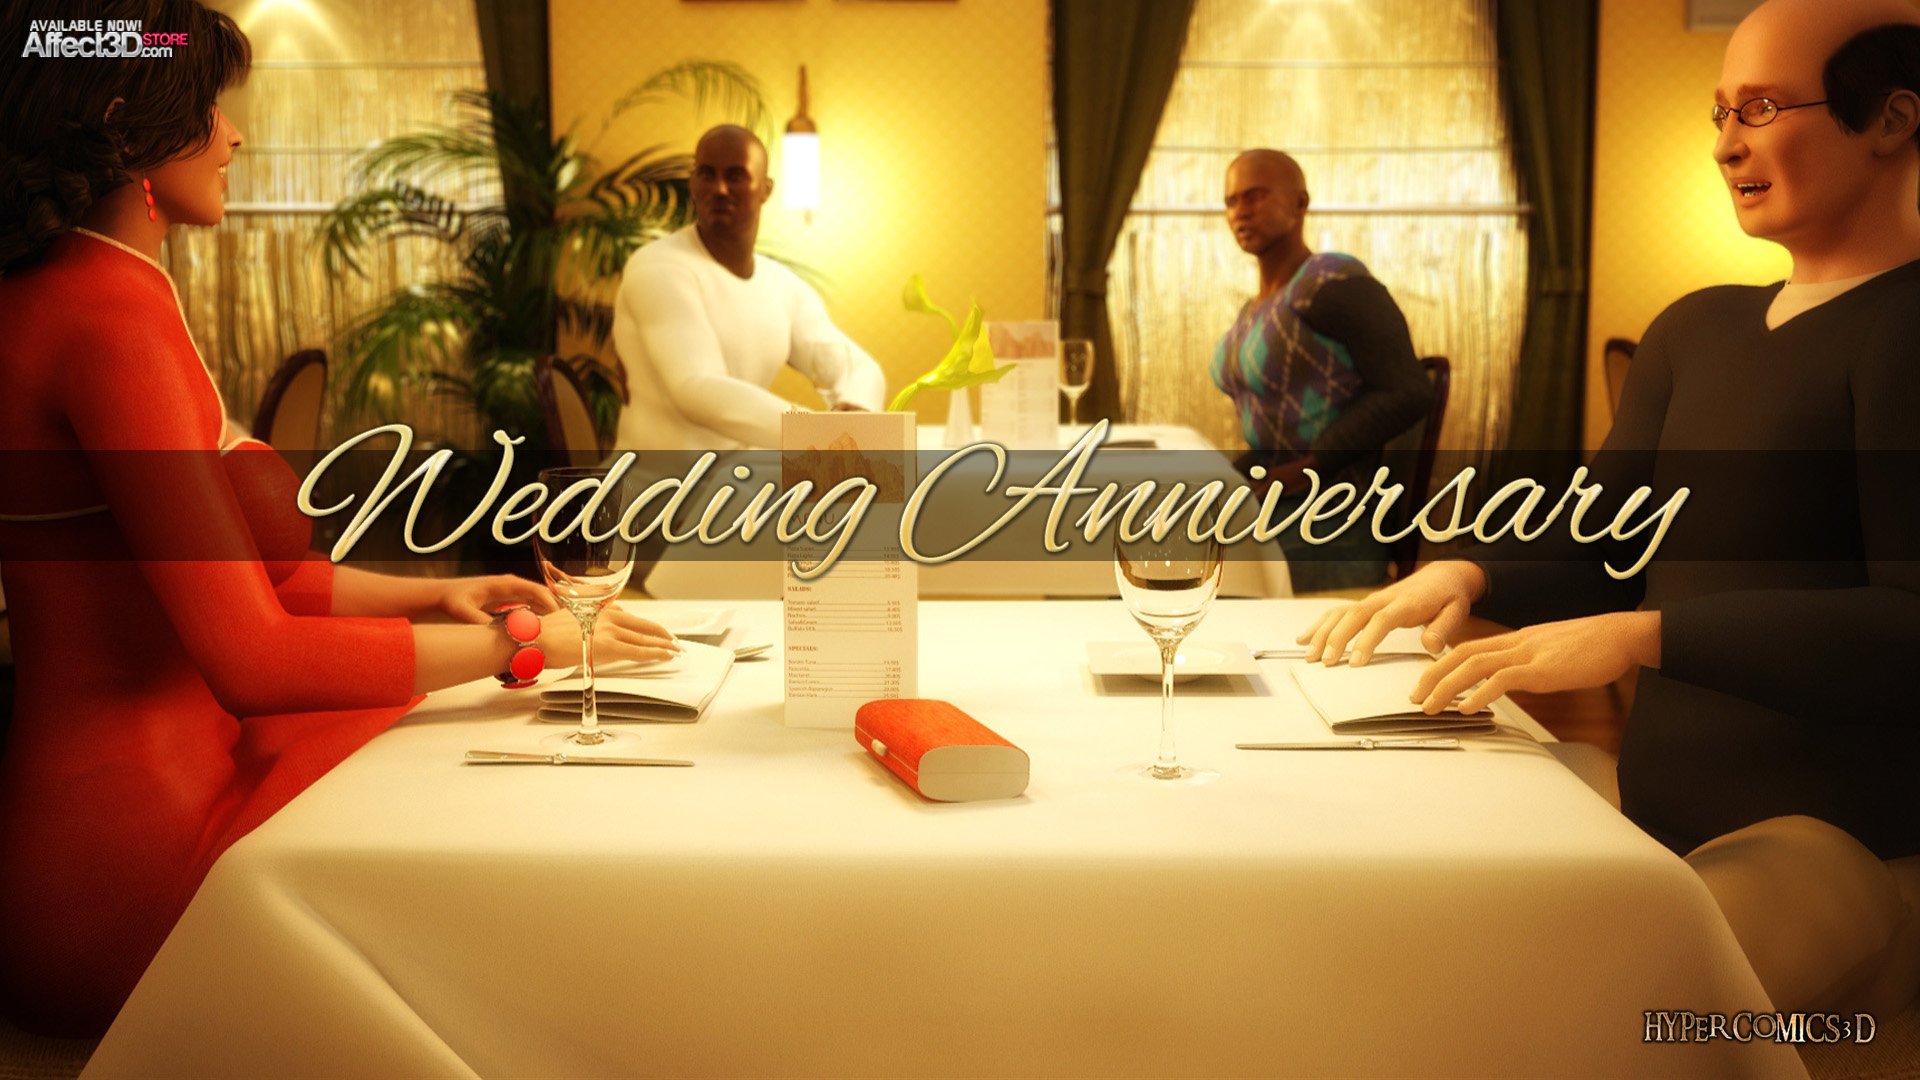 Wedding Anniversary, or making a Cuckold with two big black cocks! Watch the trailer!